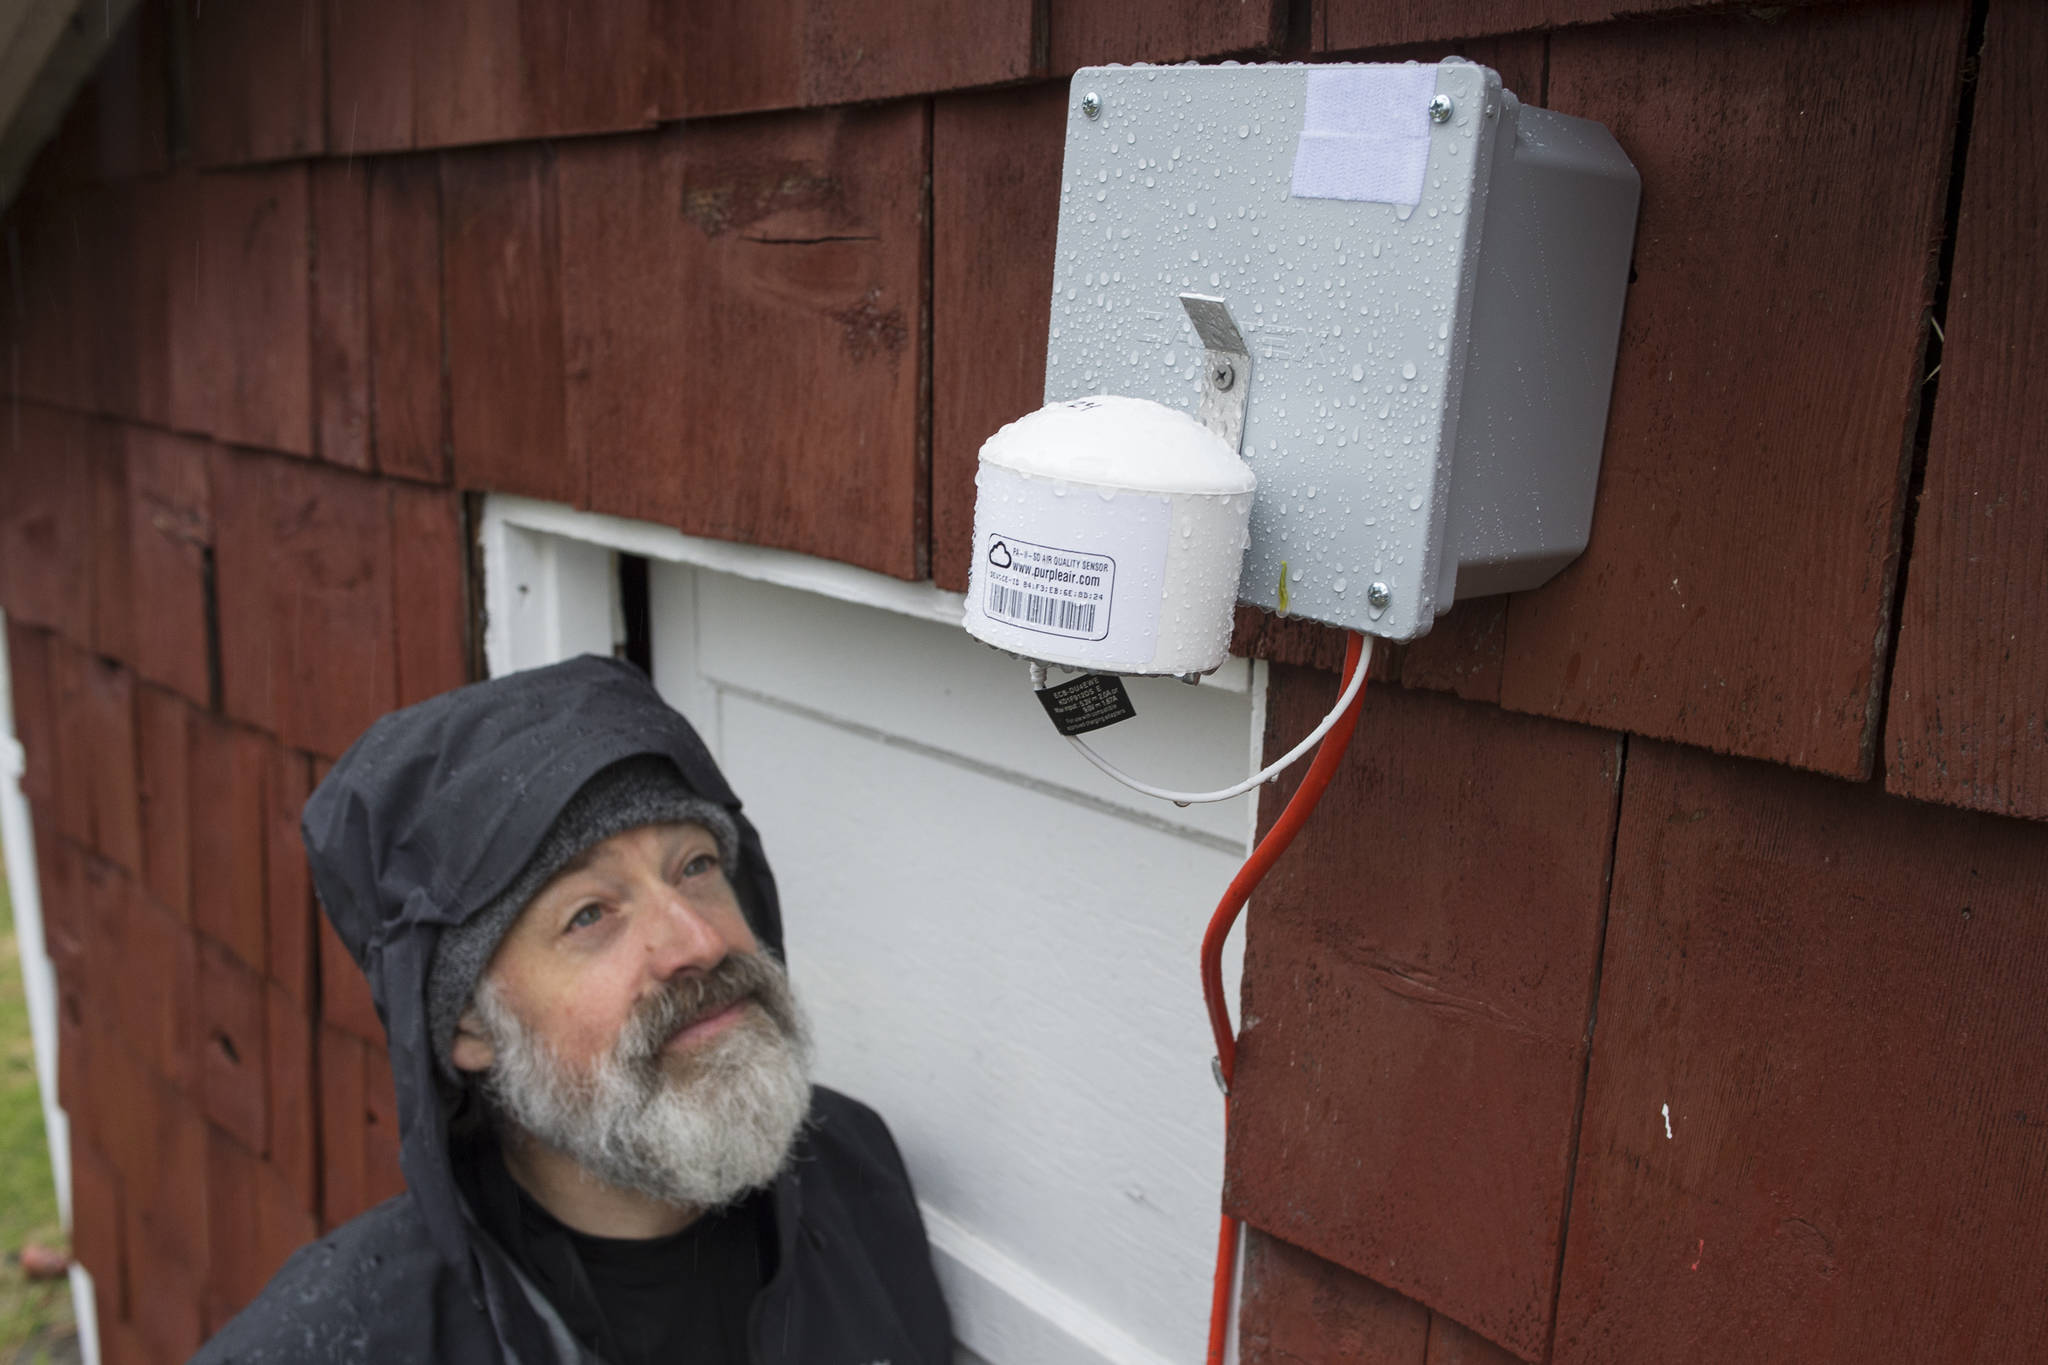 Mike Hekkers looks at an air quality measurement device that was installed by the Department of Environmental Conservation at his downtown Juneau home on Thursday, April 18, 2019. The device, along with a number of others, will measure air quality in downtown during this summer’s cruise ship season. (Michael Penn |Juneau Empire)